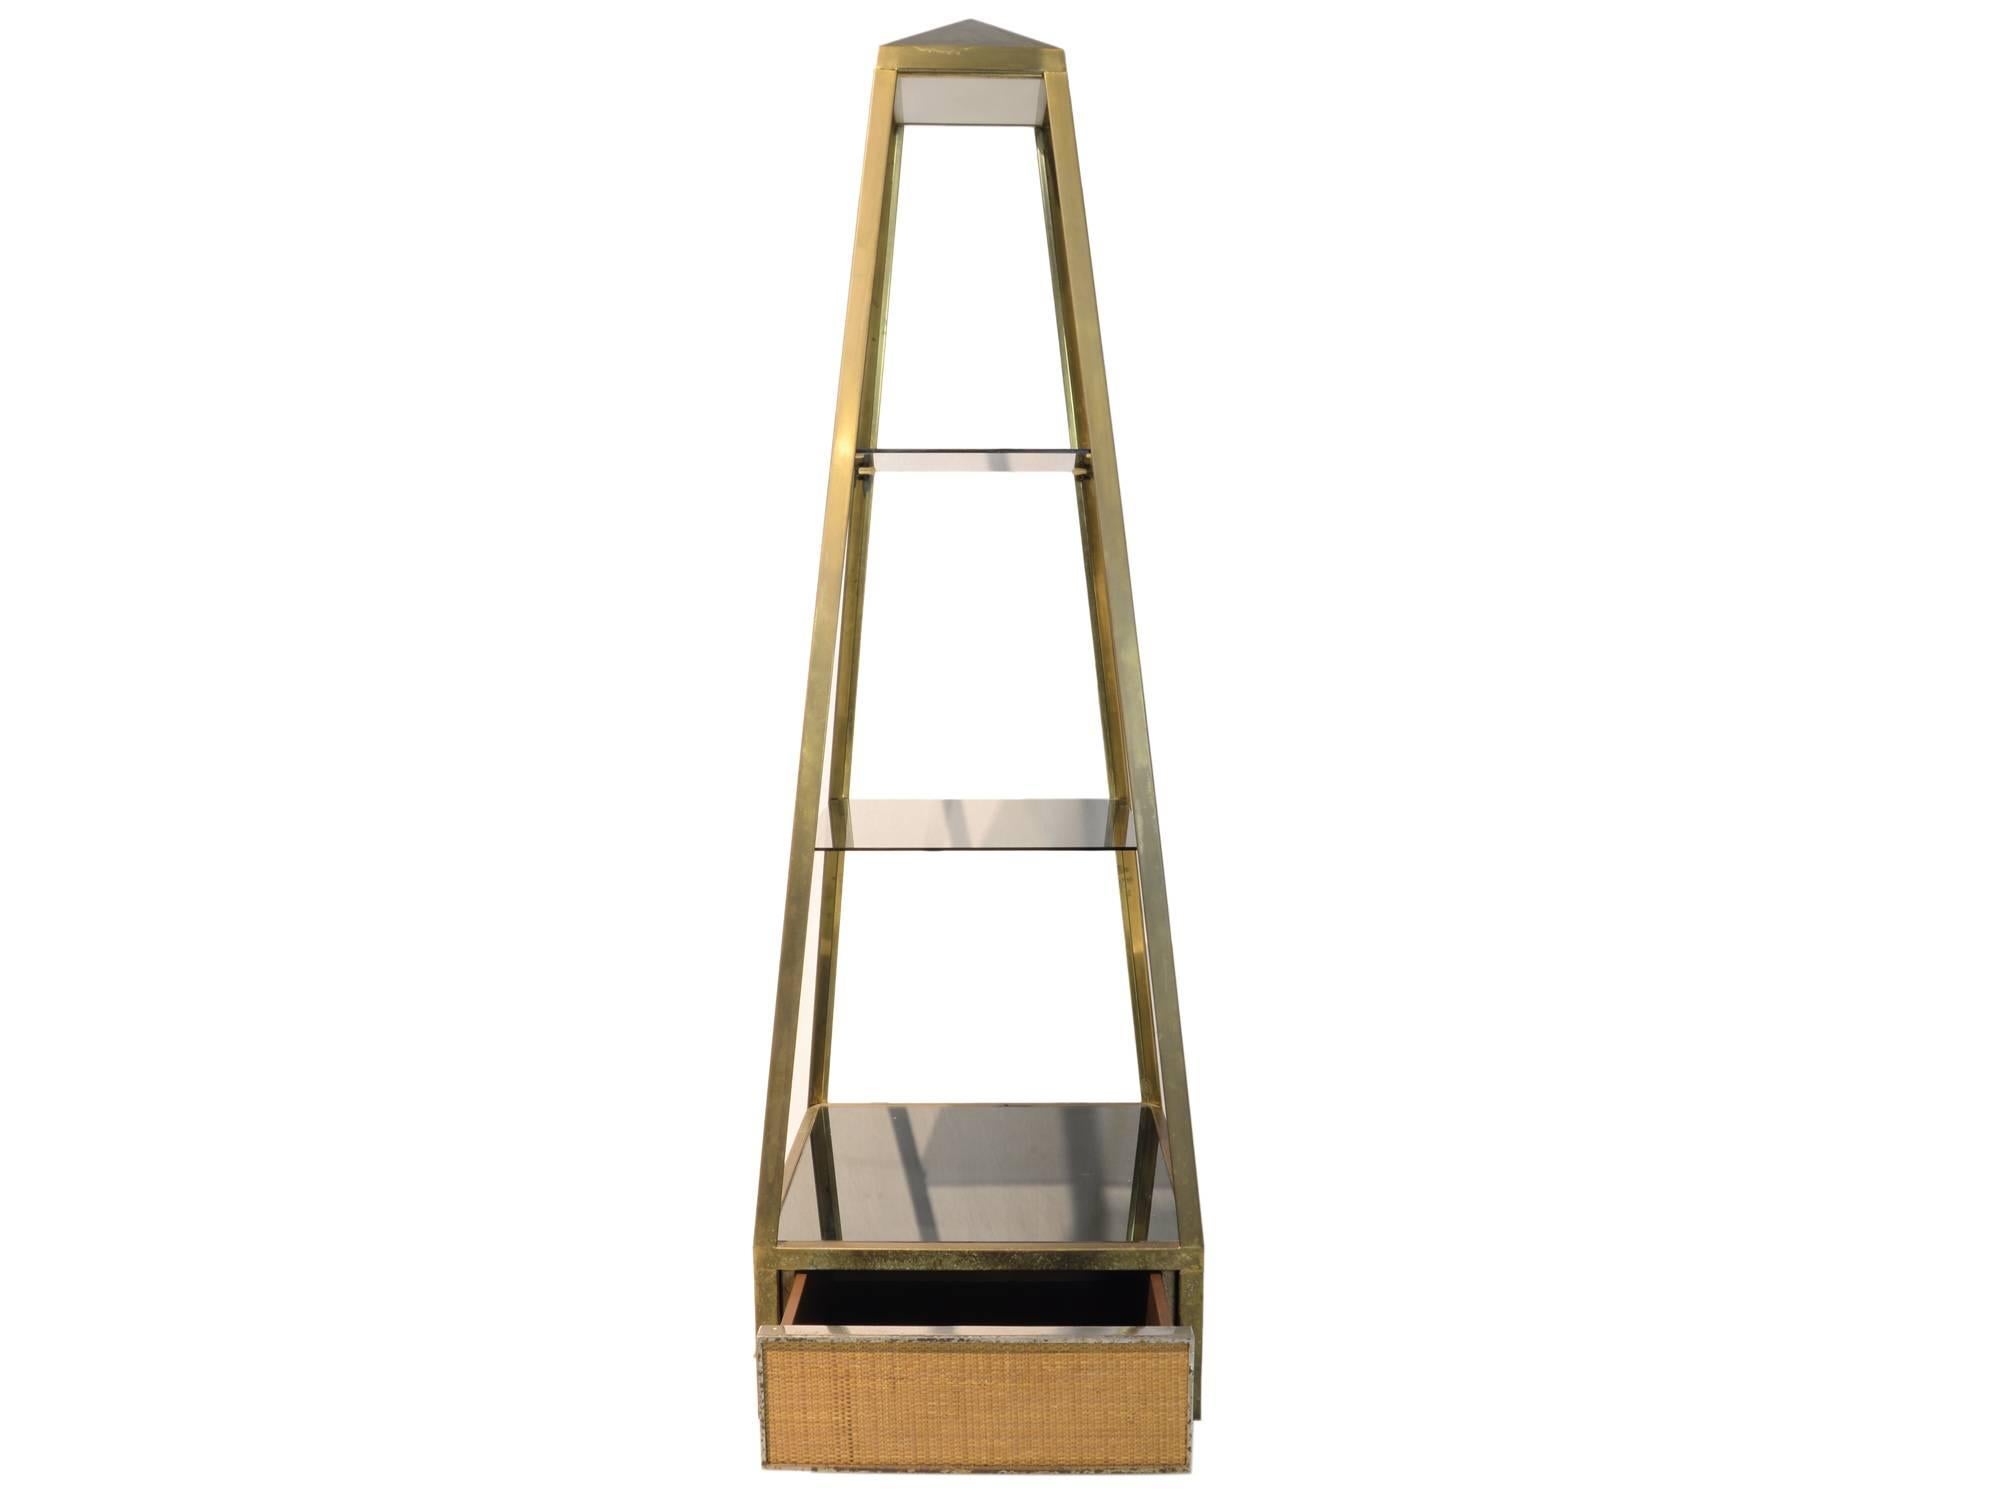 French Willy Rizzo, Pair of Stands with Obelisk Shape in Brass and Glass